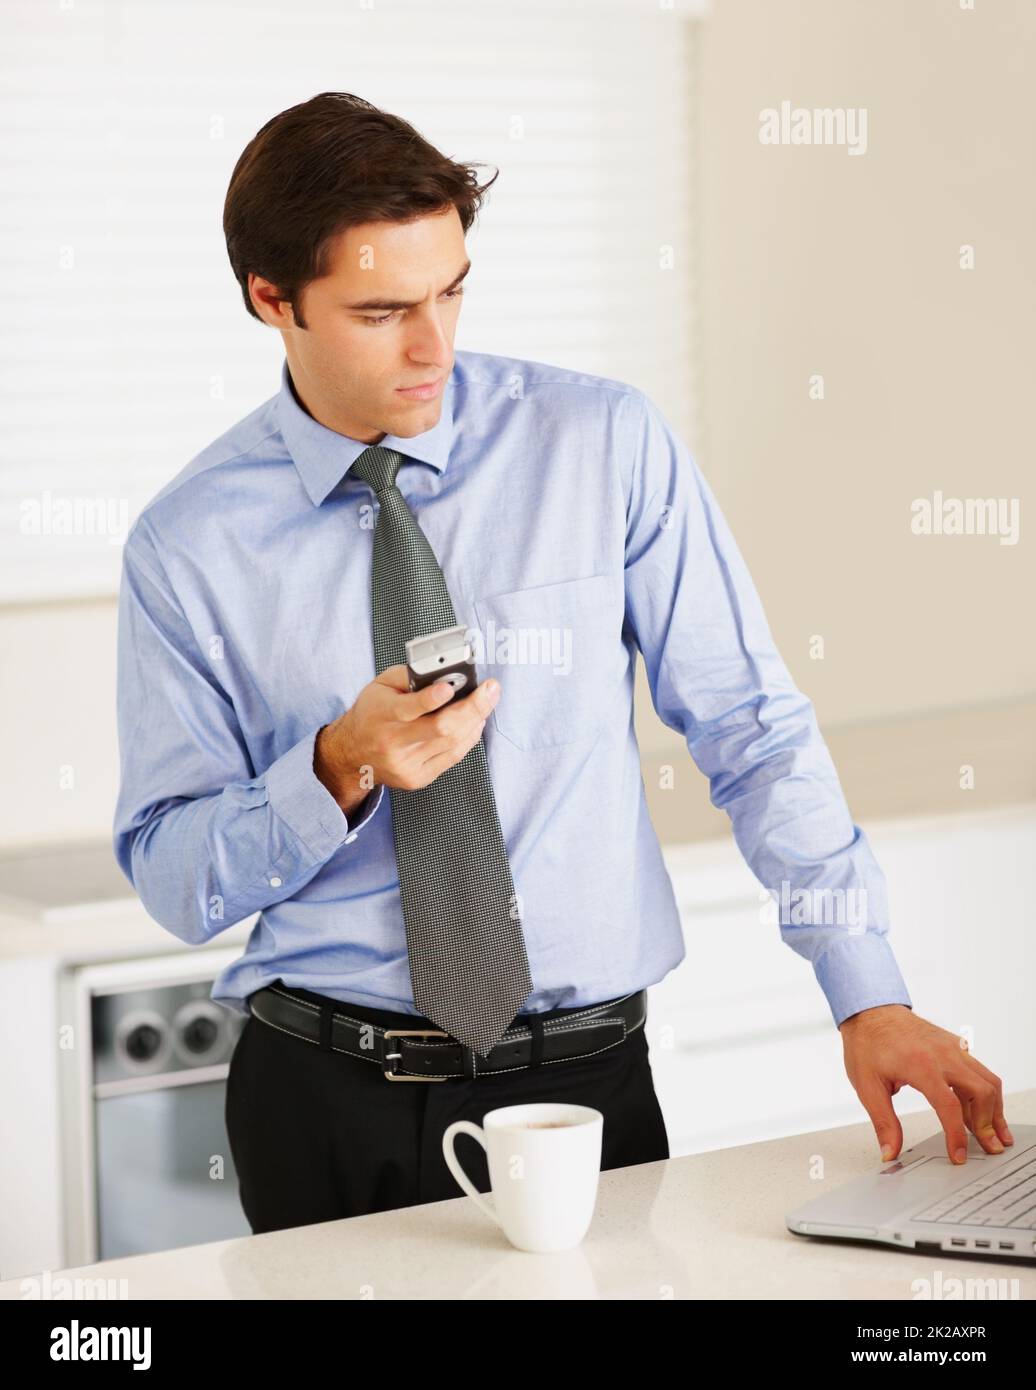 Business executive using cellphone while working on a laptop. Successful young business executive using cellphone while working on a laptop at home. Stock Photo